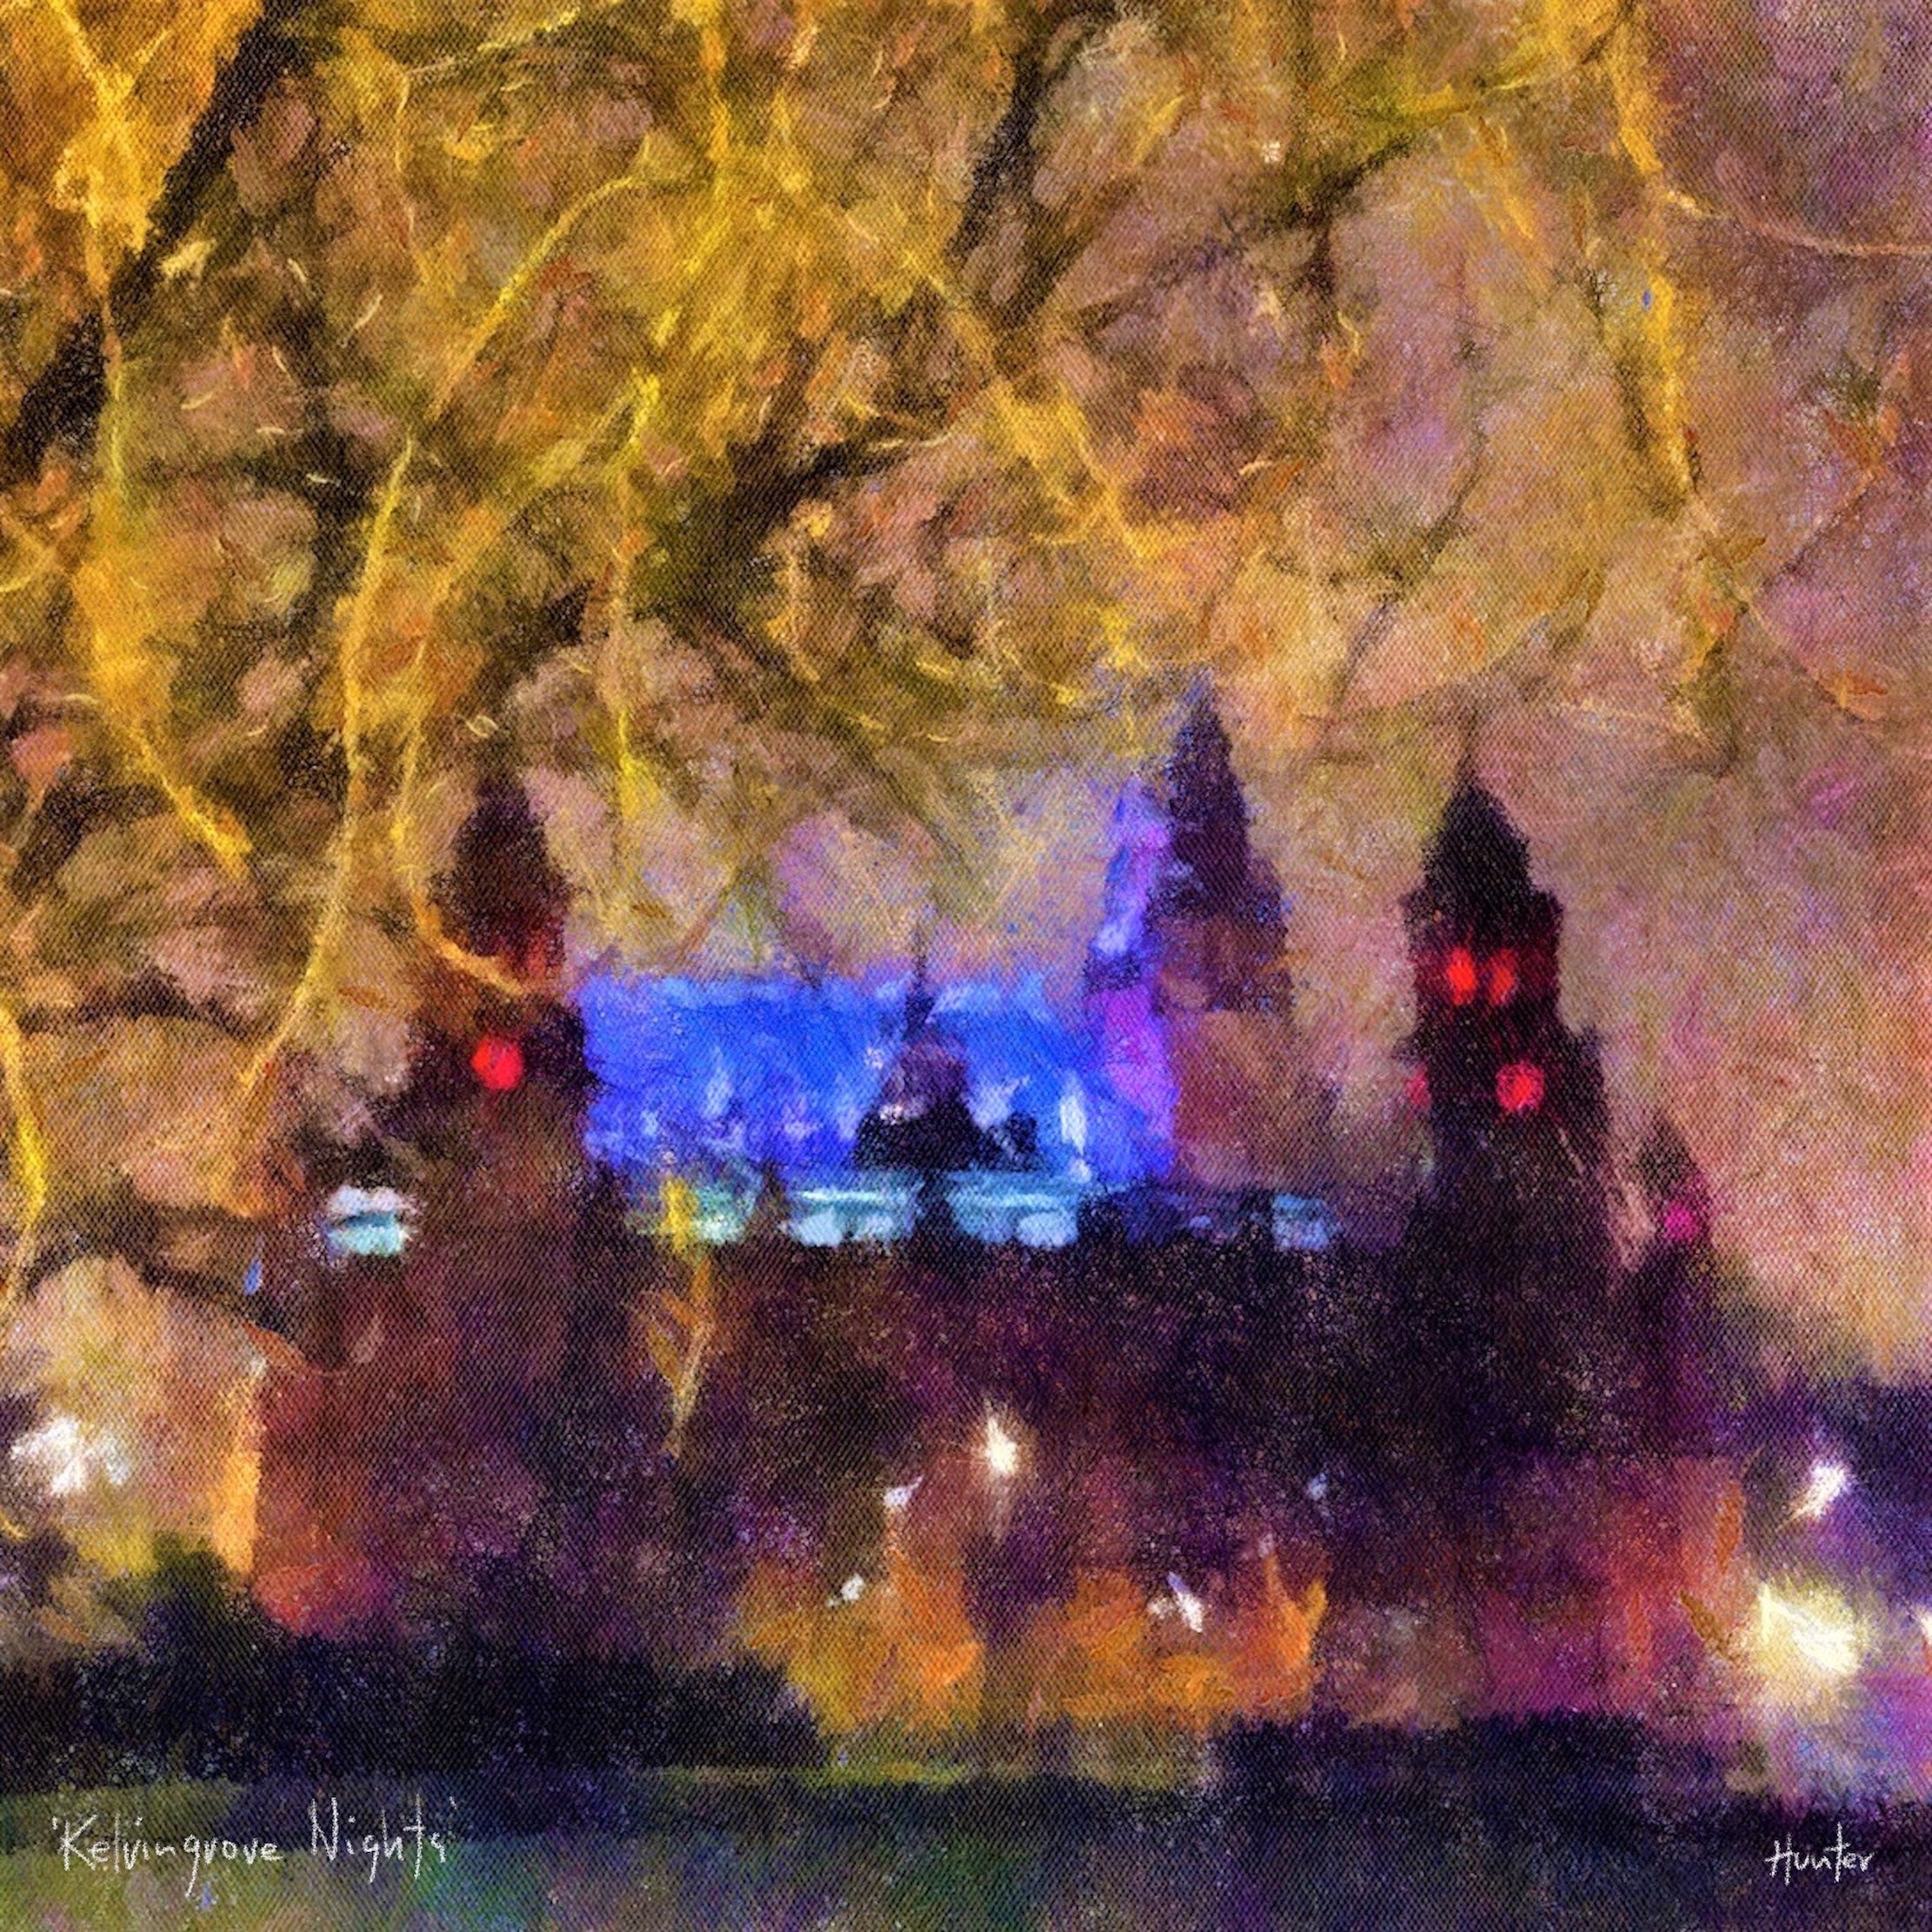 Kelvingrove Nights | Scotland In Your Pocket Art Print-Scotland In Your Pocket Framed Prints-Edinburgh & Glasgow Art Gallery-Mounted & Cello Bag: 12.5x12.5 cm-Black Frame-Paintings, Prints, Homeware, Art Gifts From Scotland By Scottish Artist Kevin Hunter